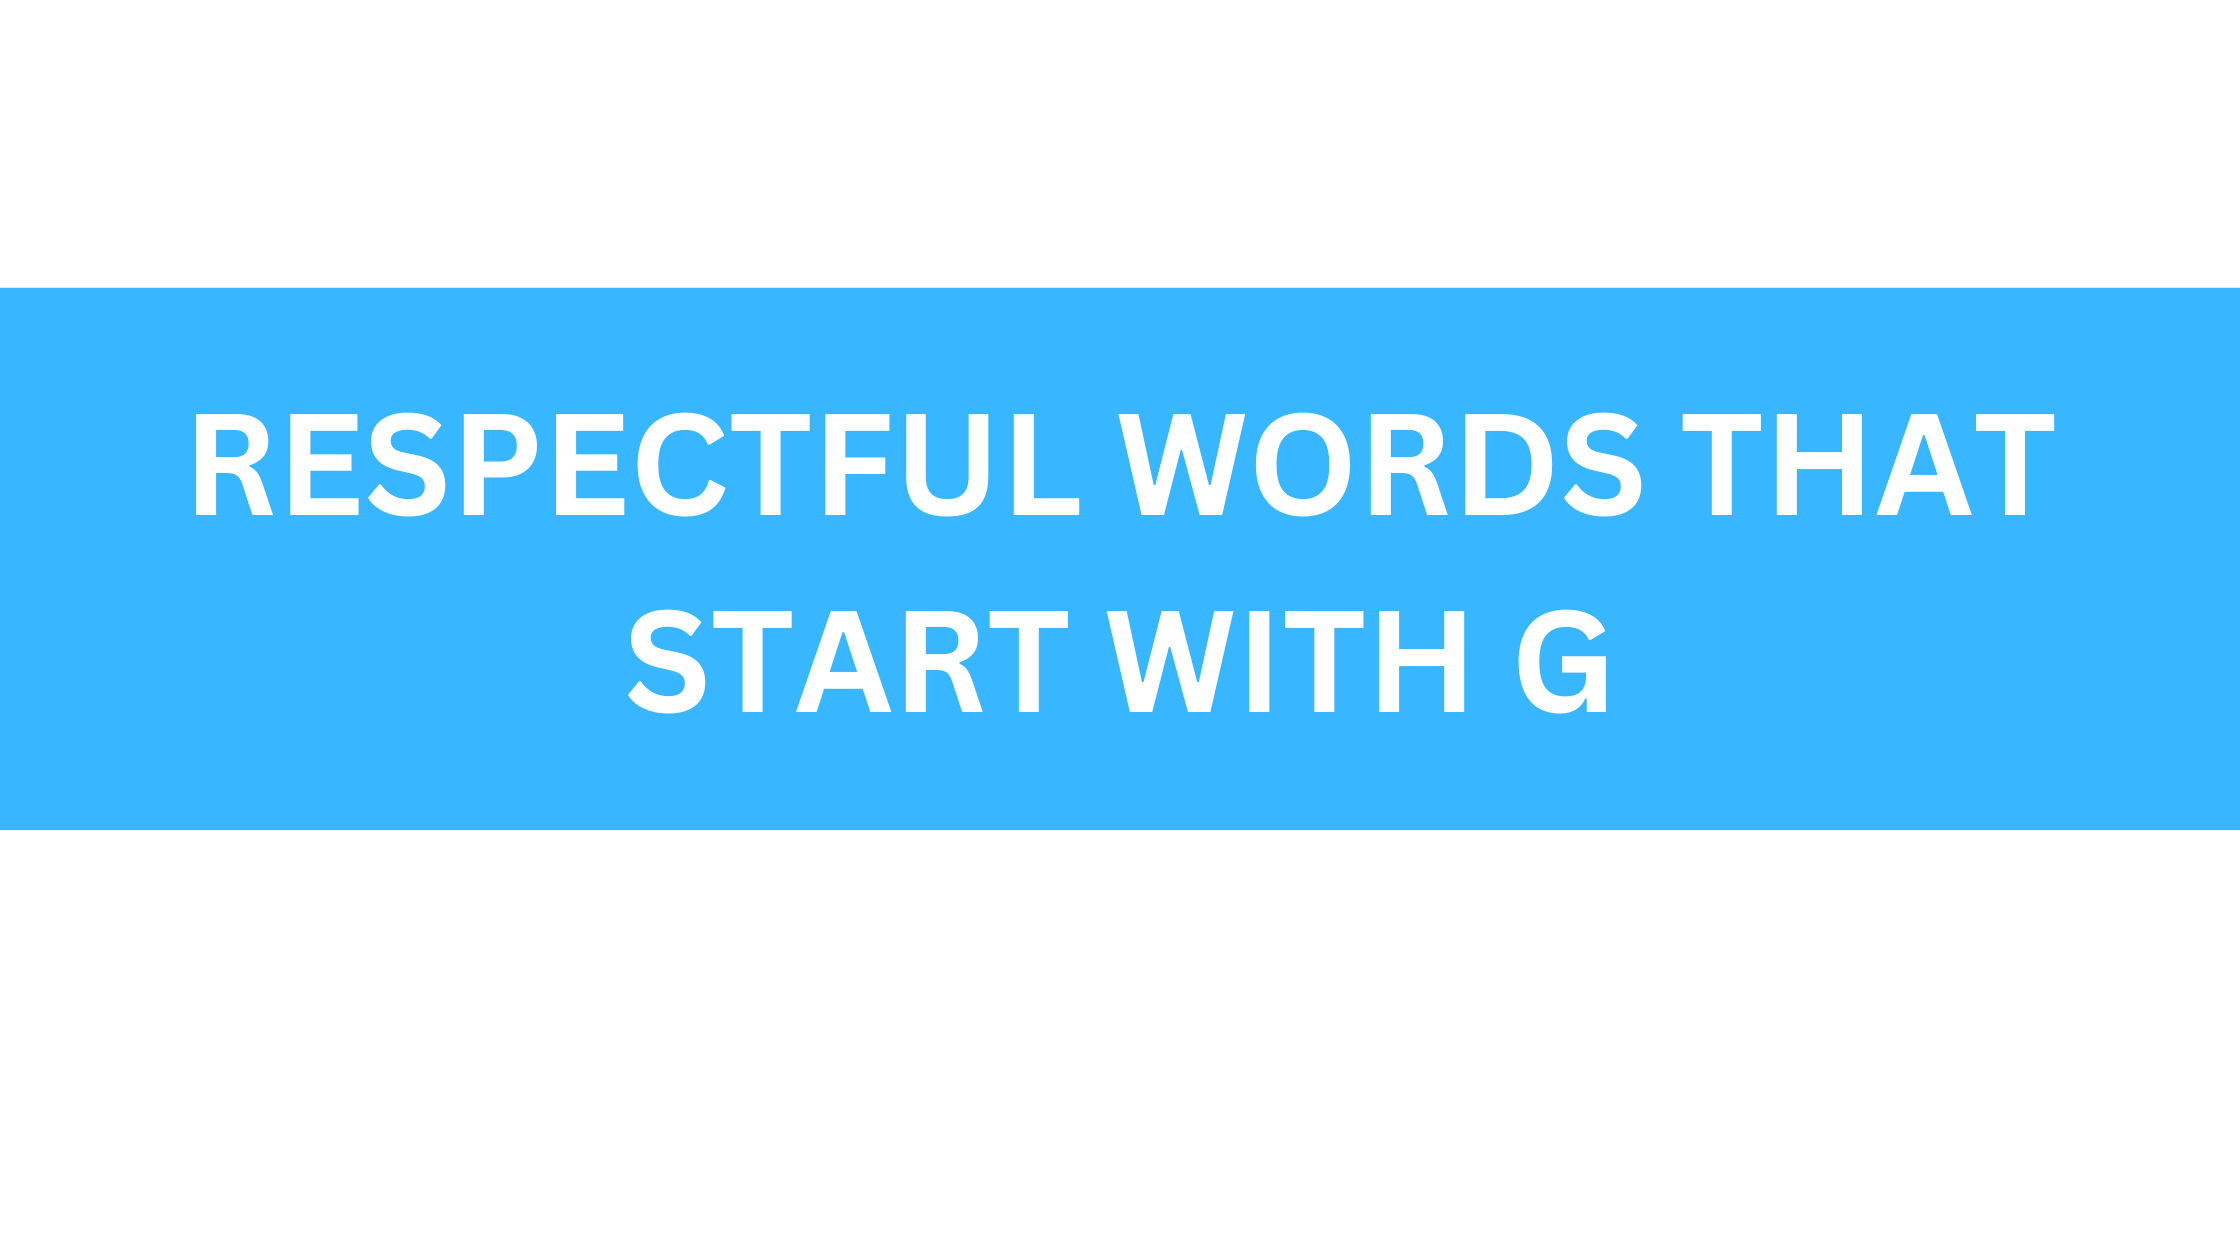 respectful words that start with g